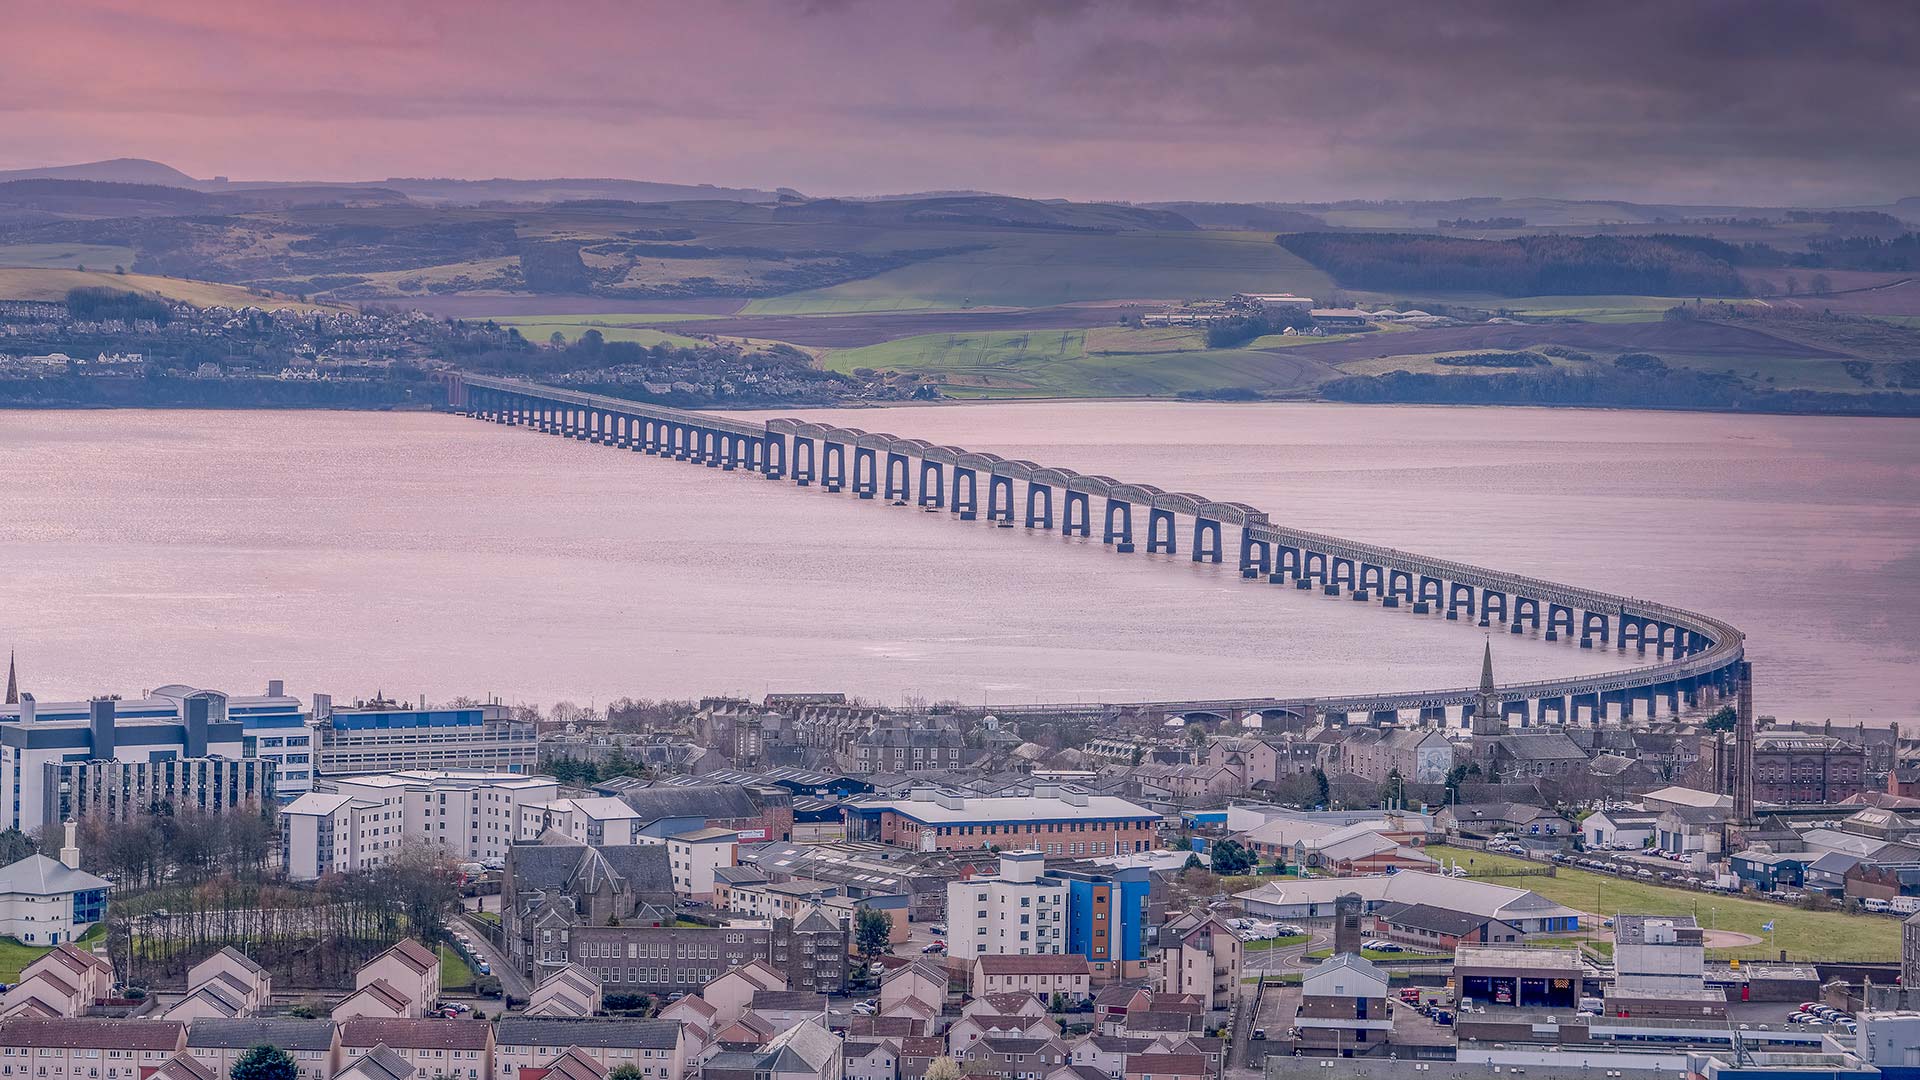 Panorama to illustrate dating in dundee